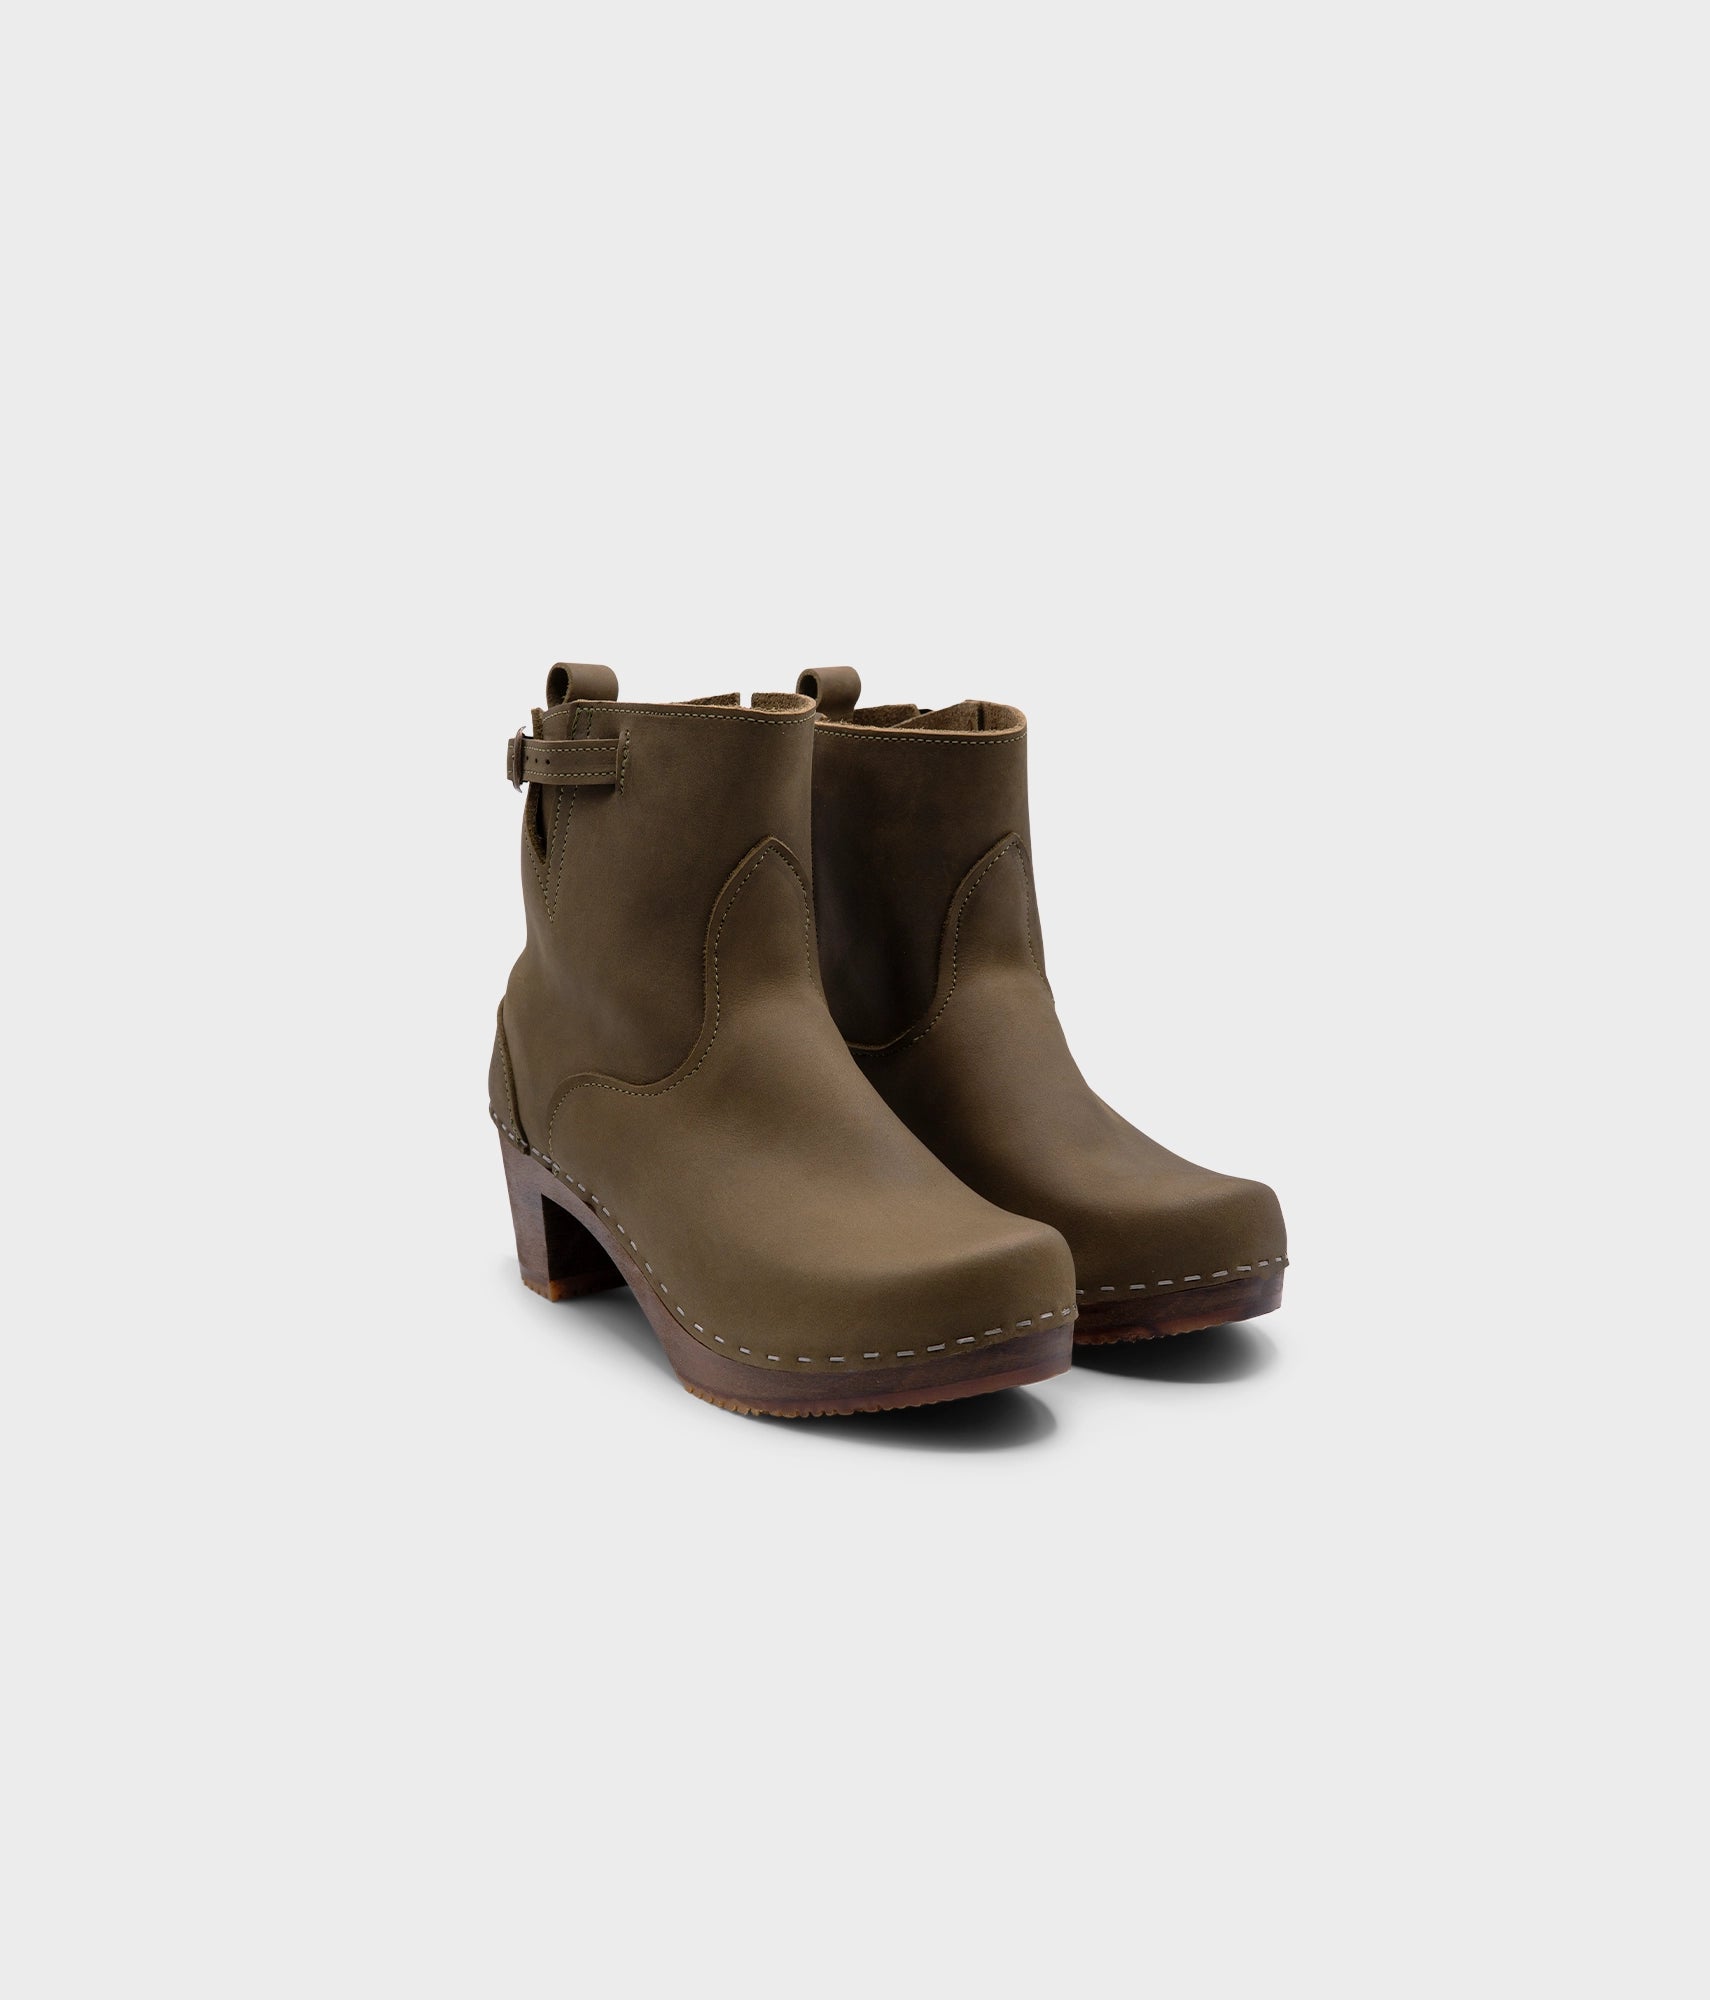 high-heeled clog boots in olive green nubuck leather stapled on a dark wooden base with a silver buckle